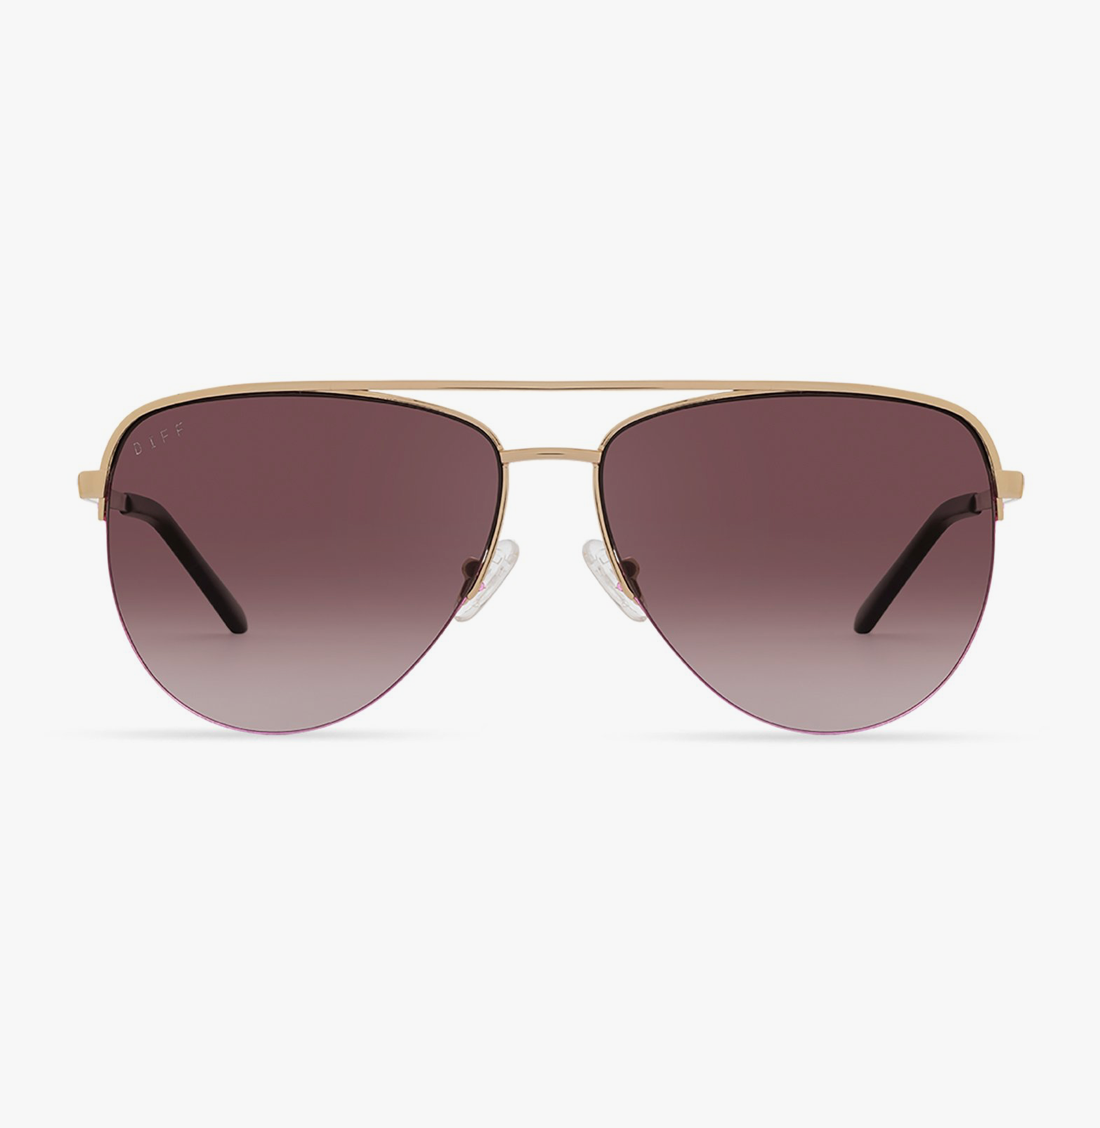 Load image into Gallery viewer, DIFF EYEWEAR - TATE - GOLD,  BROWN GRADIENT LENS- POLARIZED
